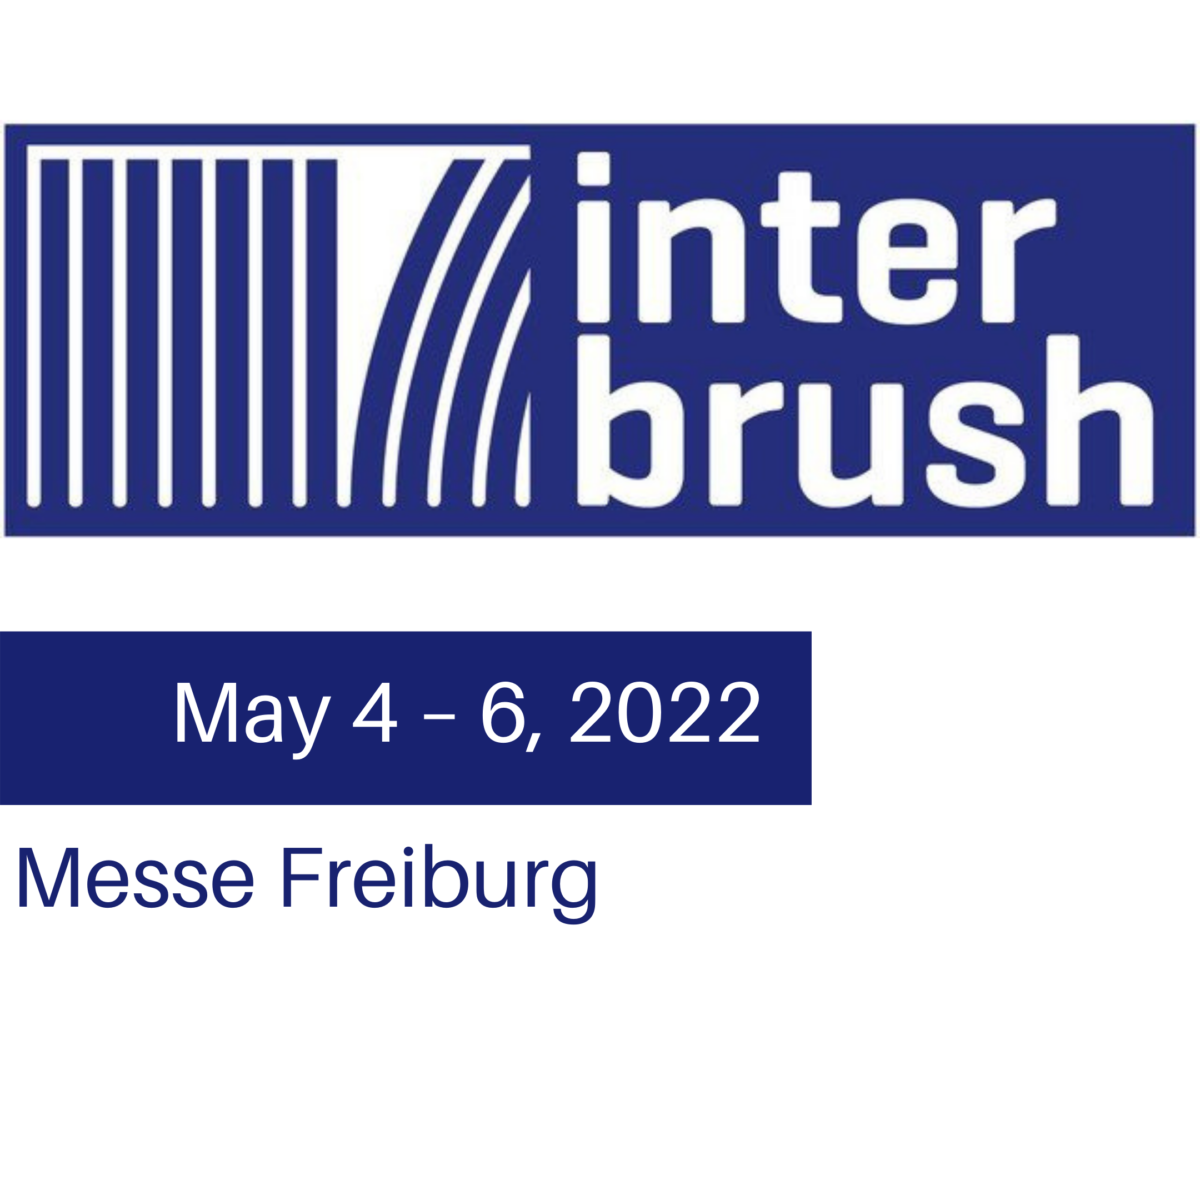 Impact of Cancellation of Interbrush 2022 for Paint brush Manufacturers In India